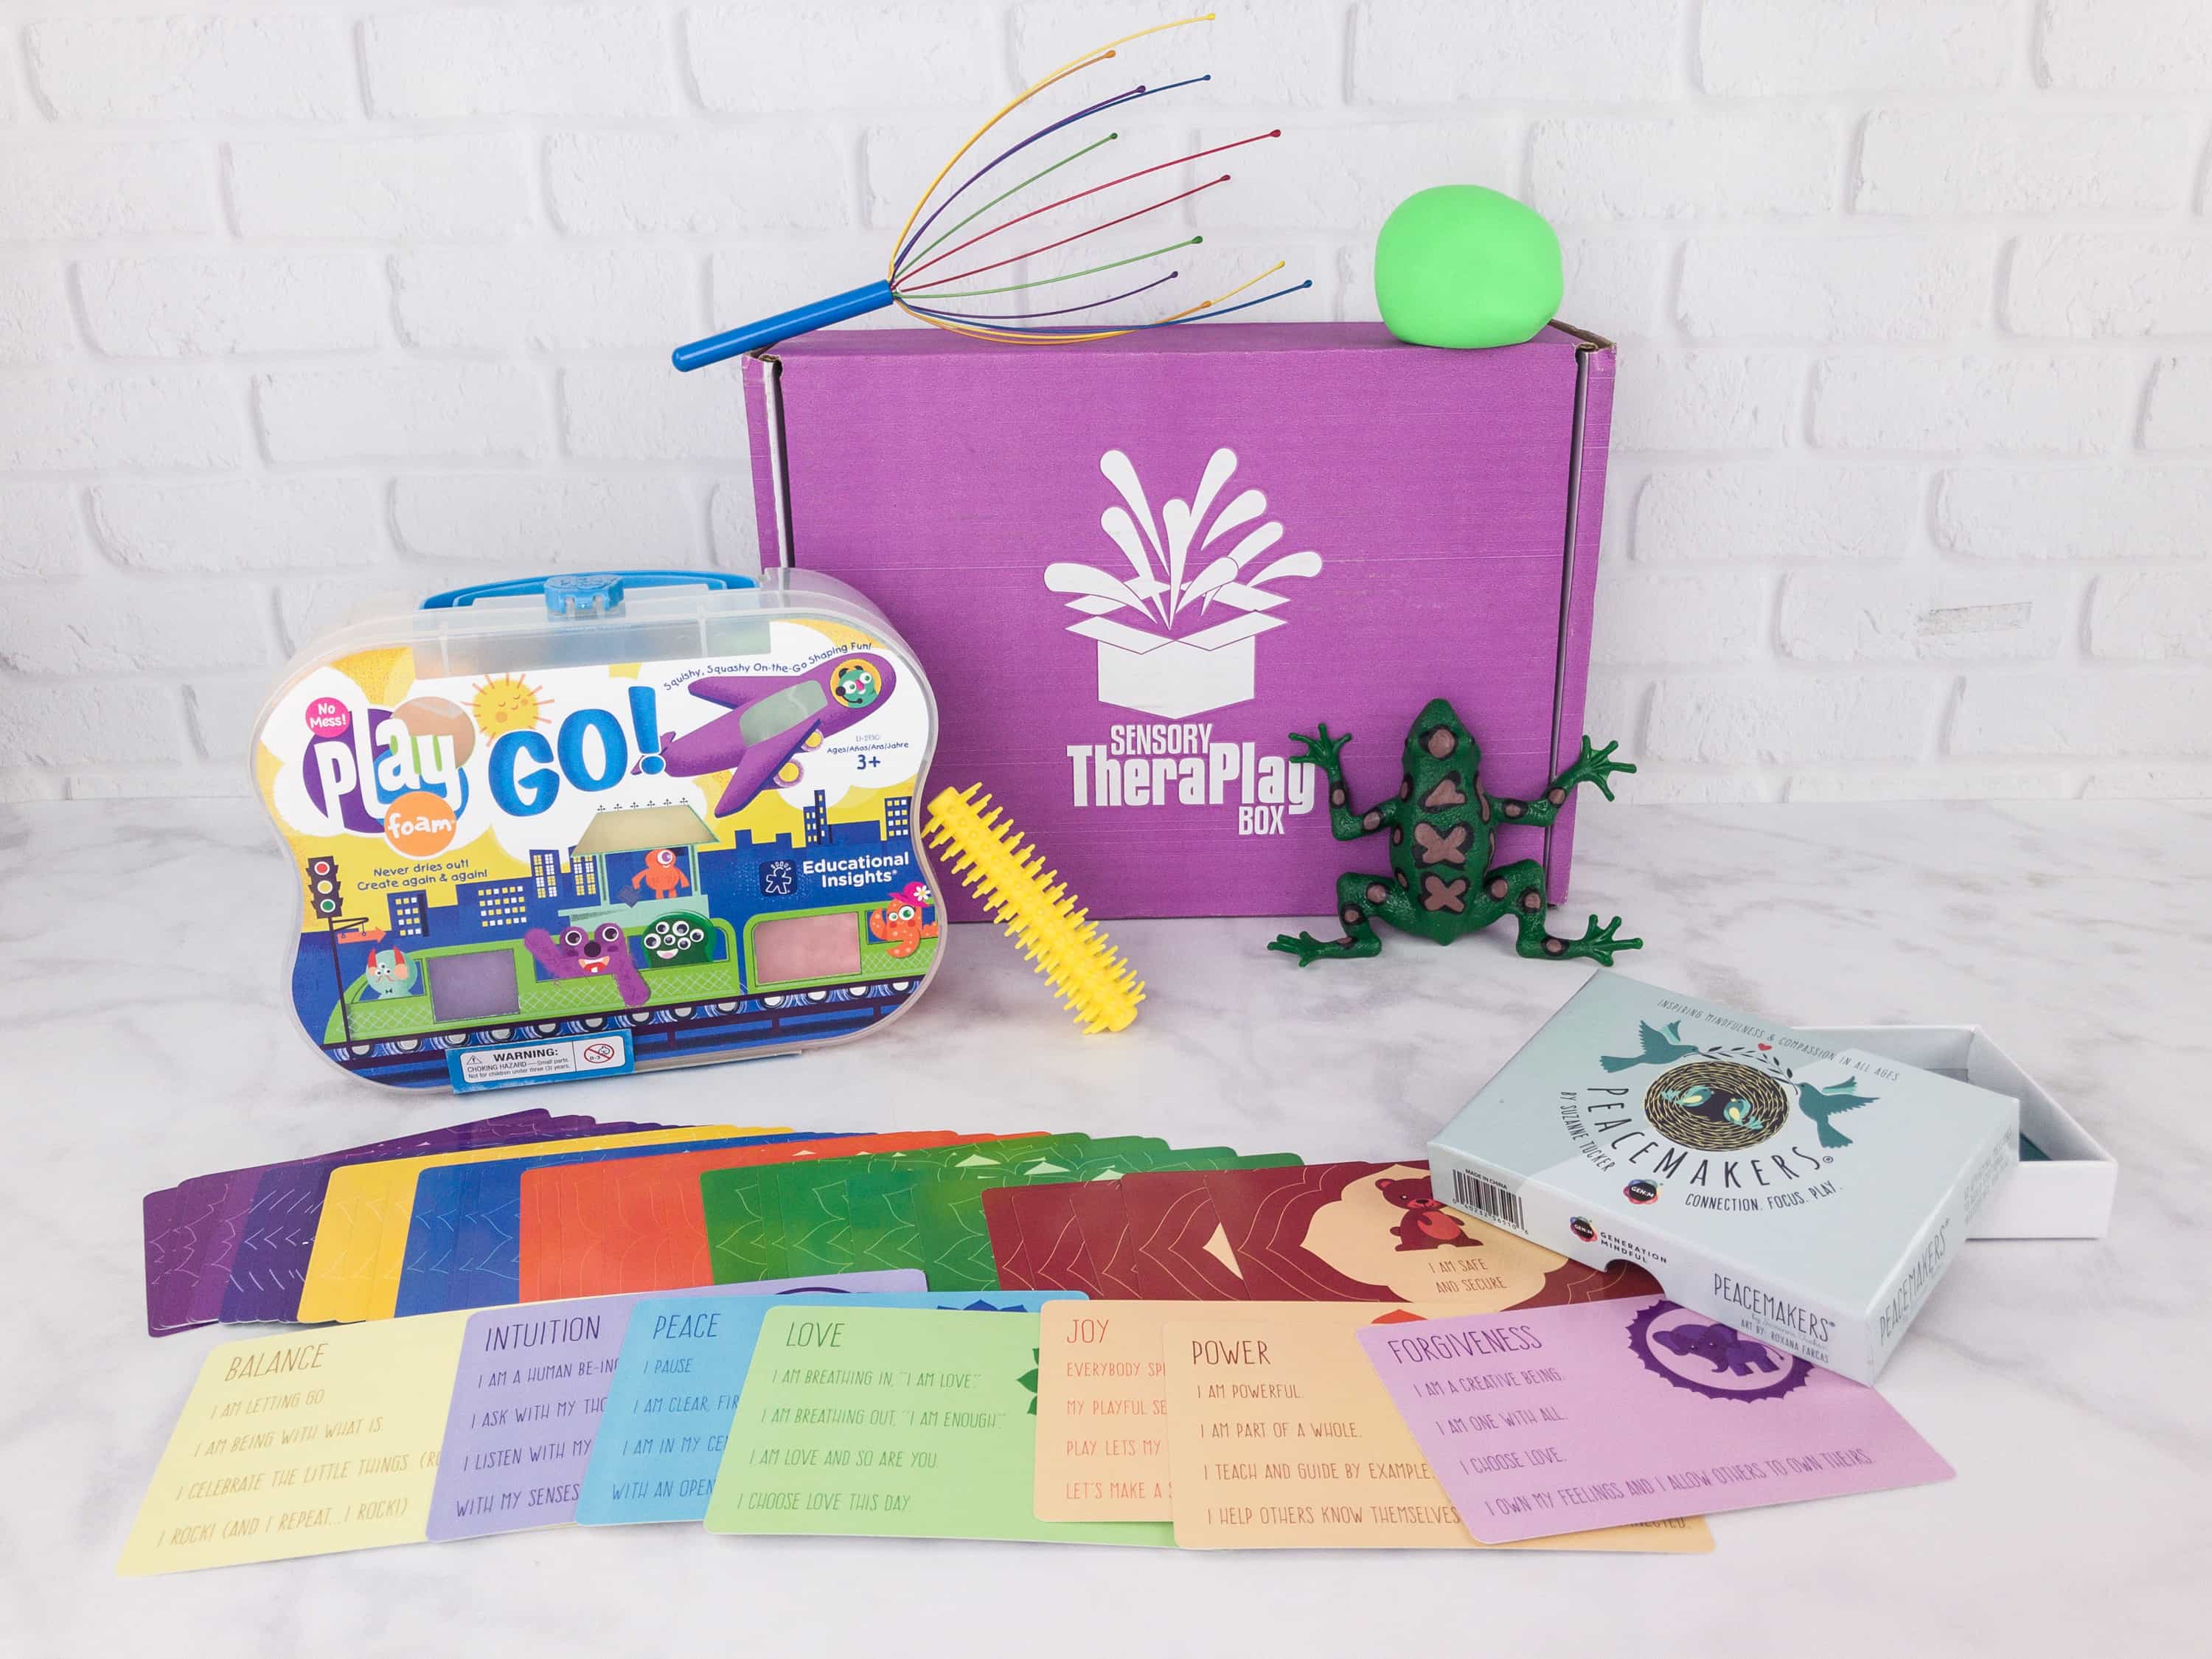 Sensory TheraPlay Box August 2022 Review + Coupon